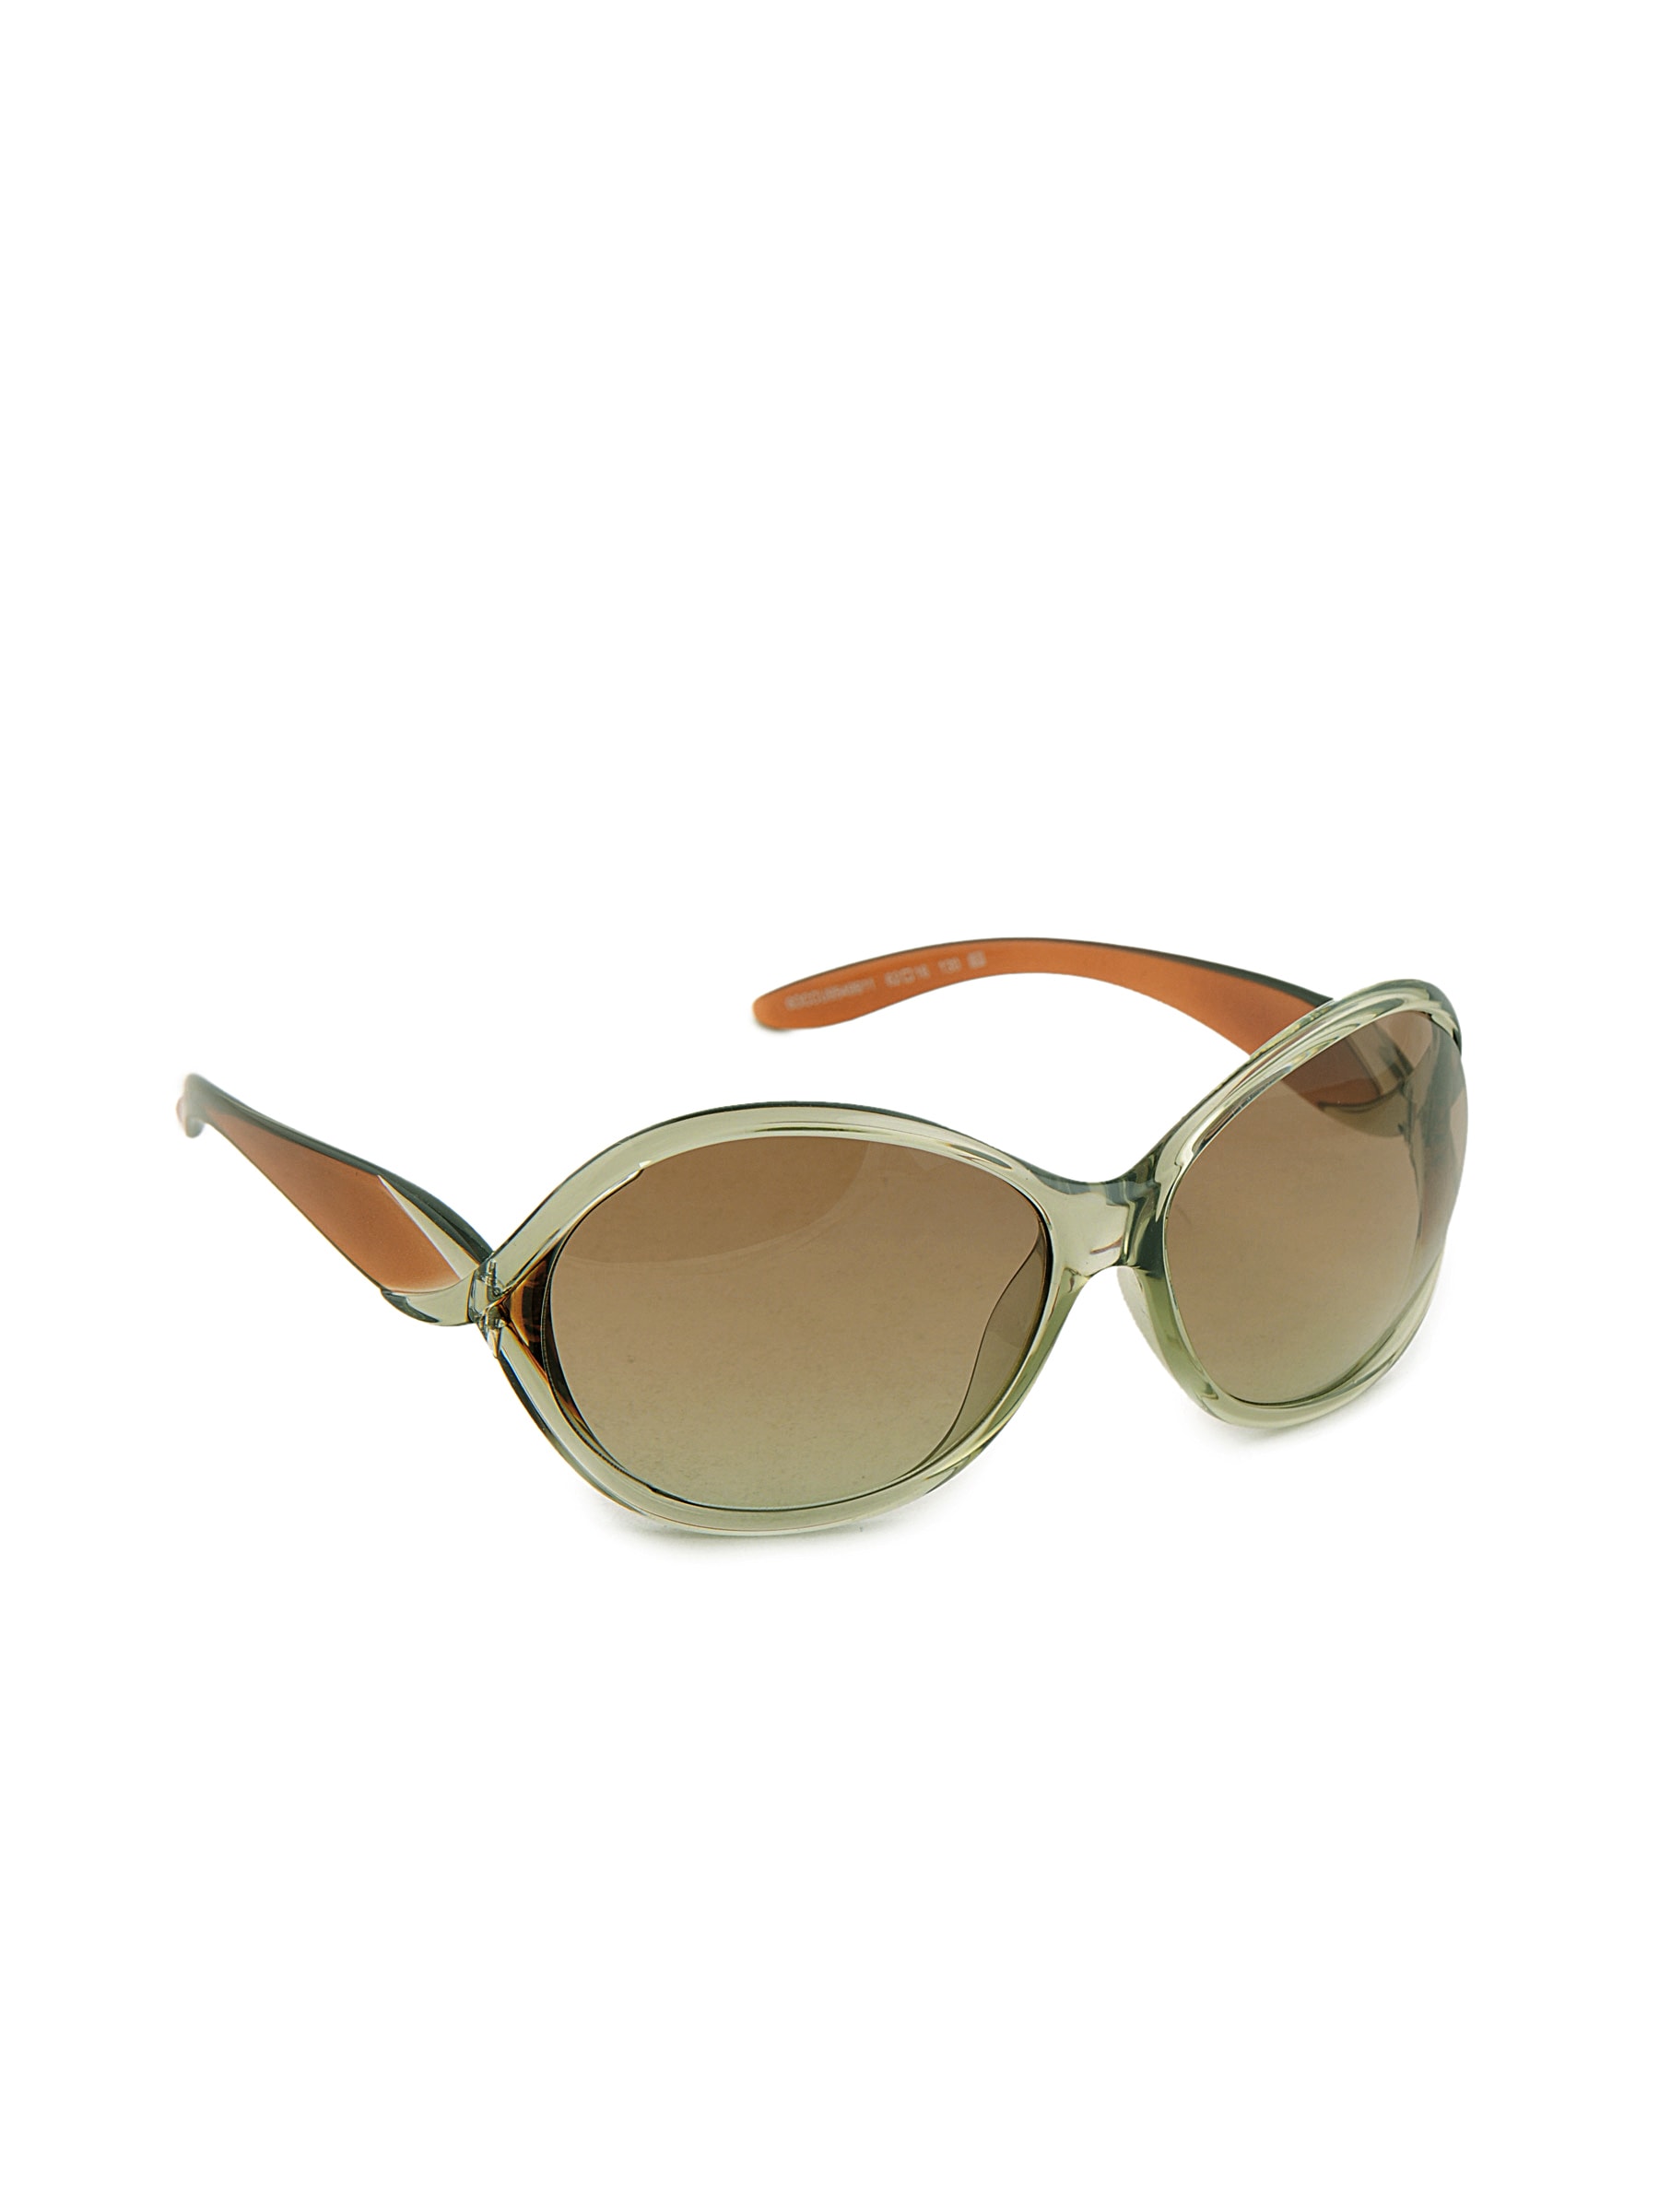 United Colors of Benetton Women Casual Olive Sunglasses